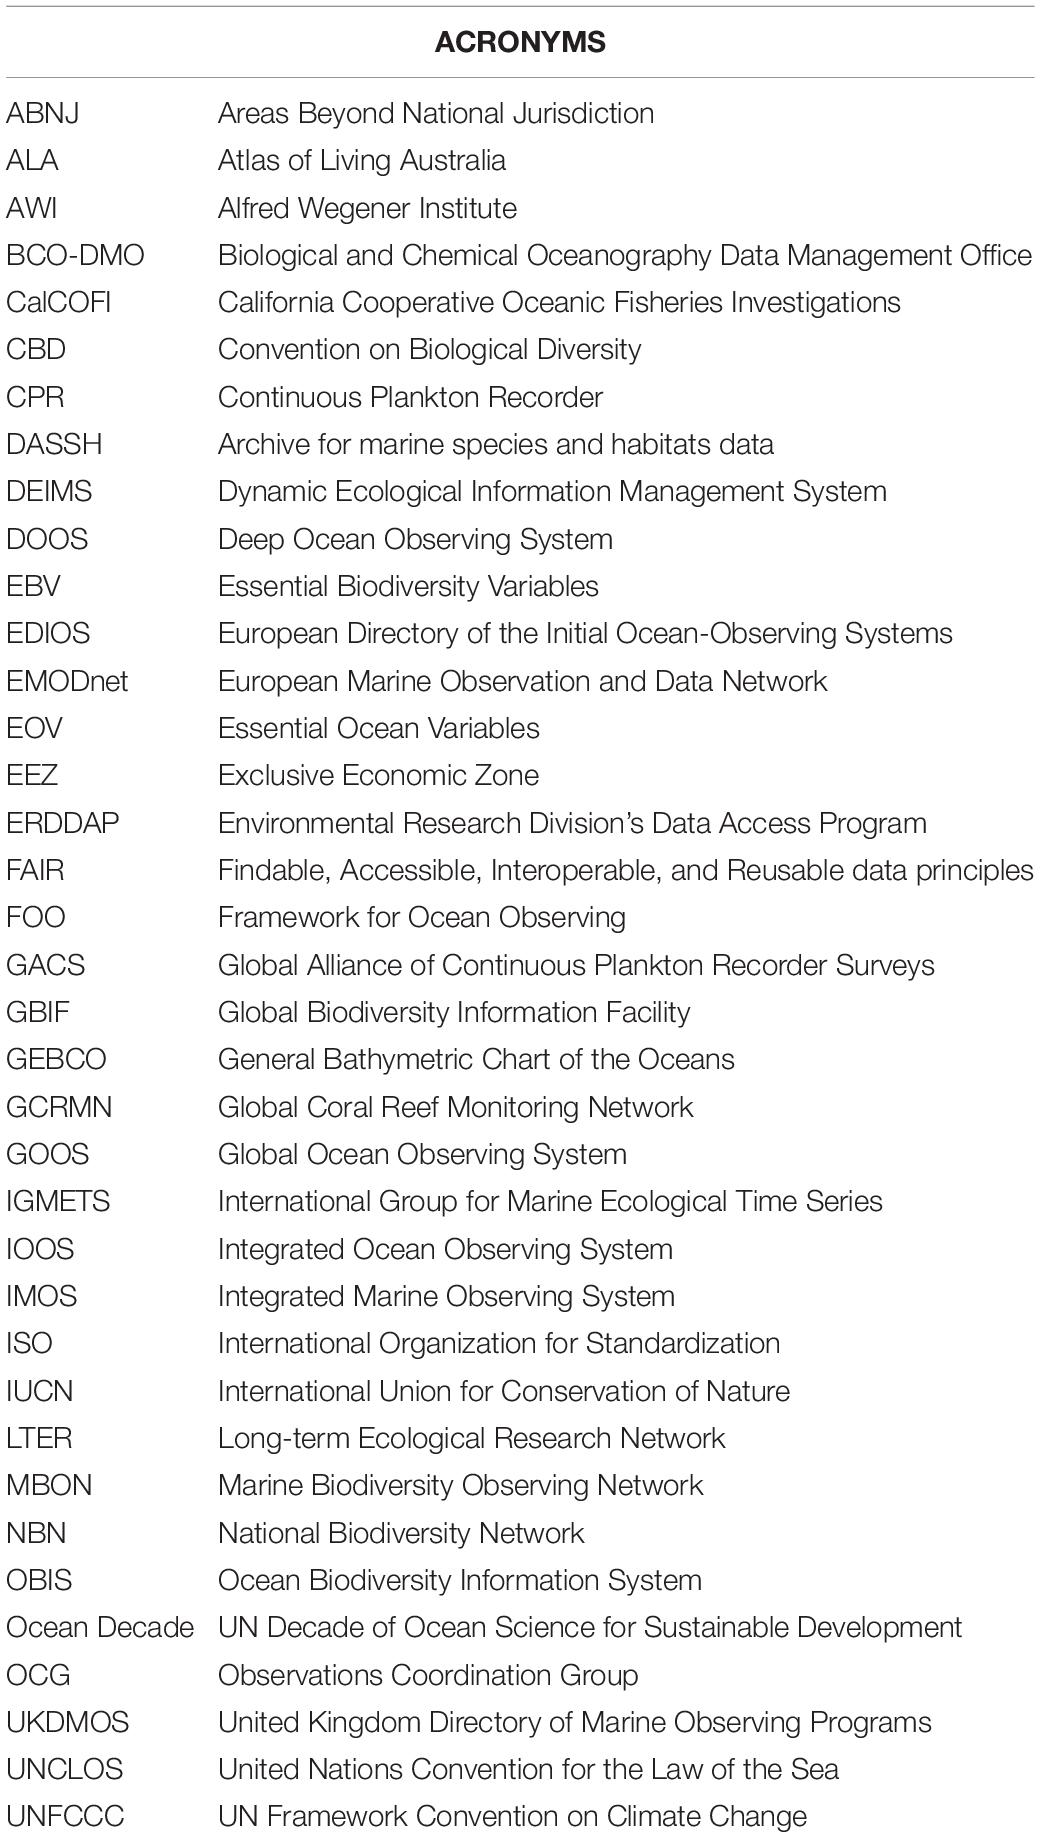 ERDDAP - Deep Sea Corals Research and Technology Program National Database  - Make A Graph